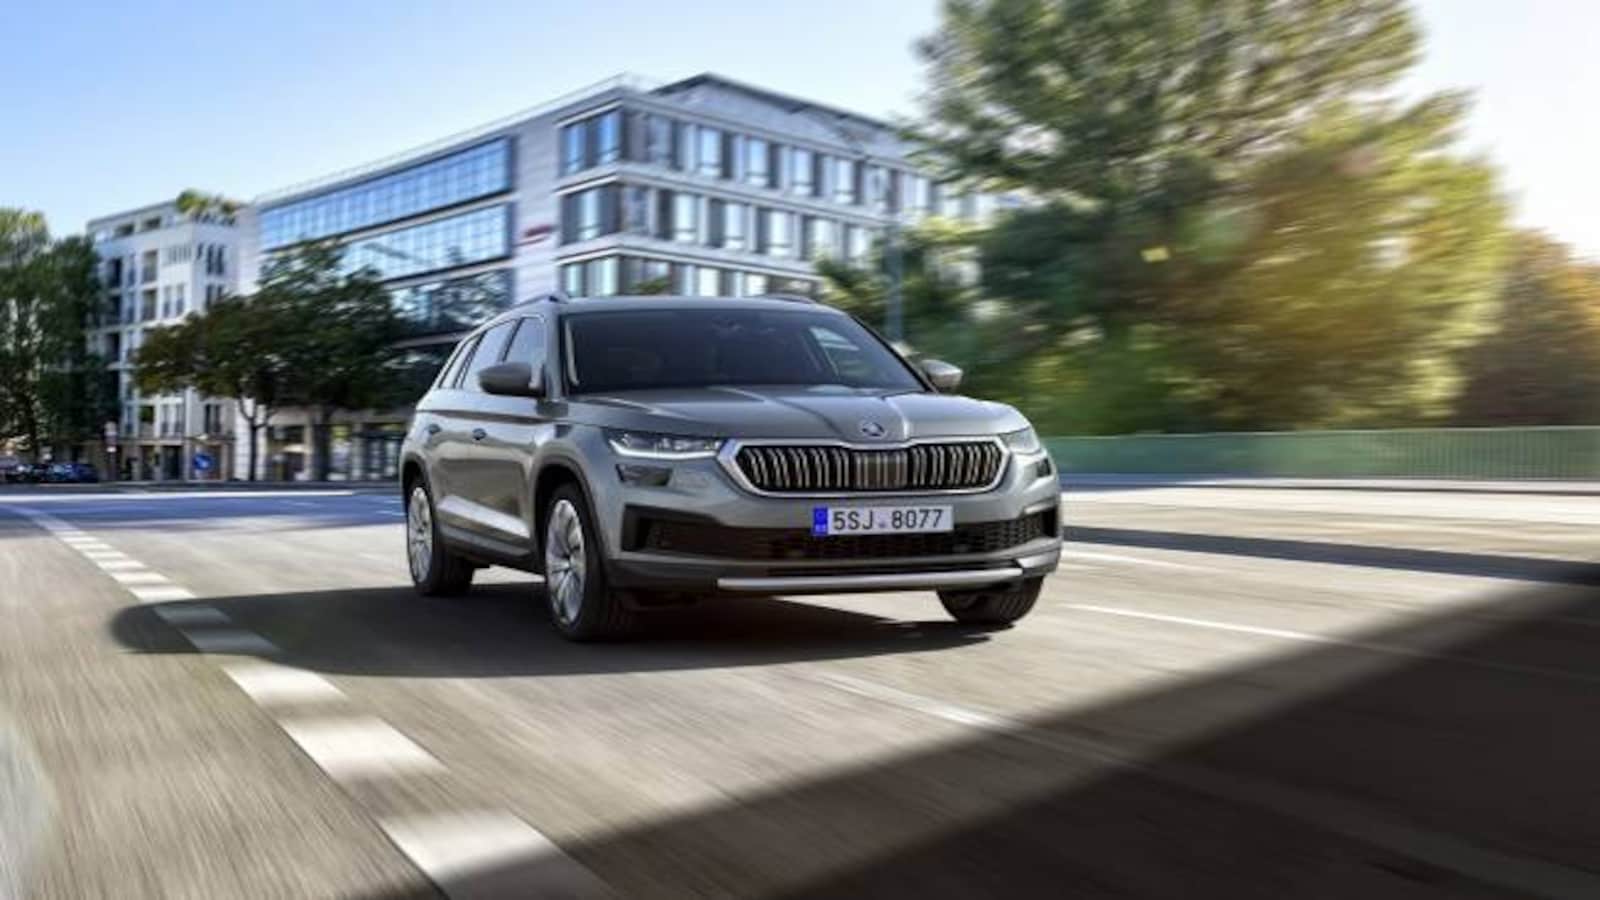 2022 Skoda Kodiaq Review: What you should know about the new